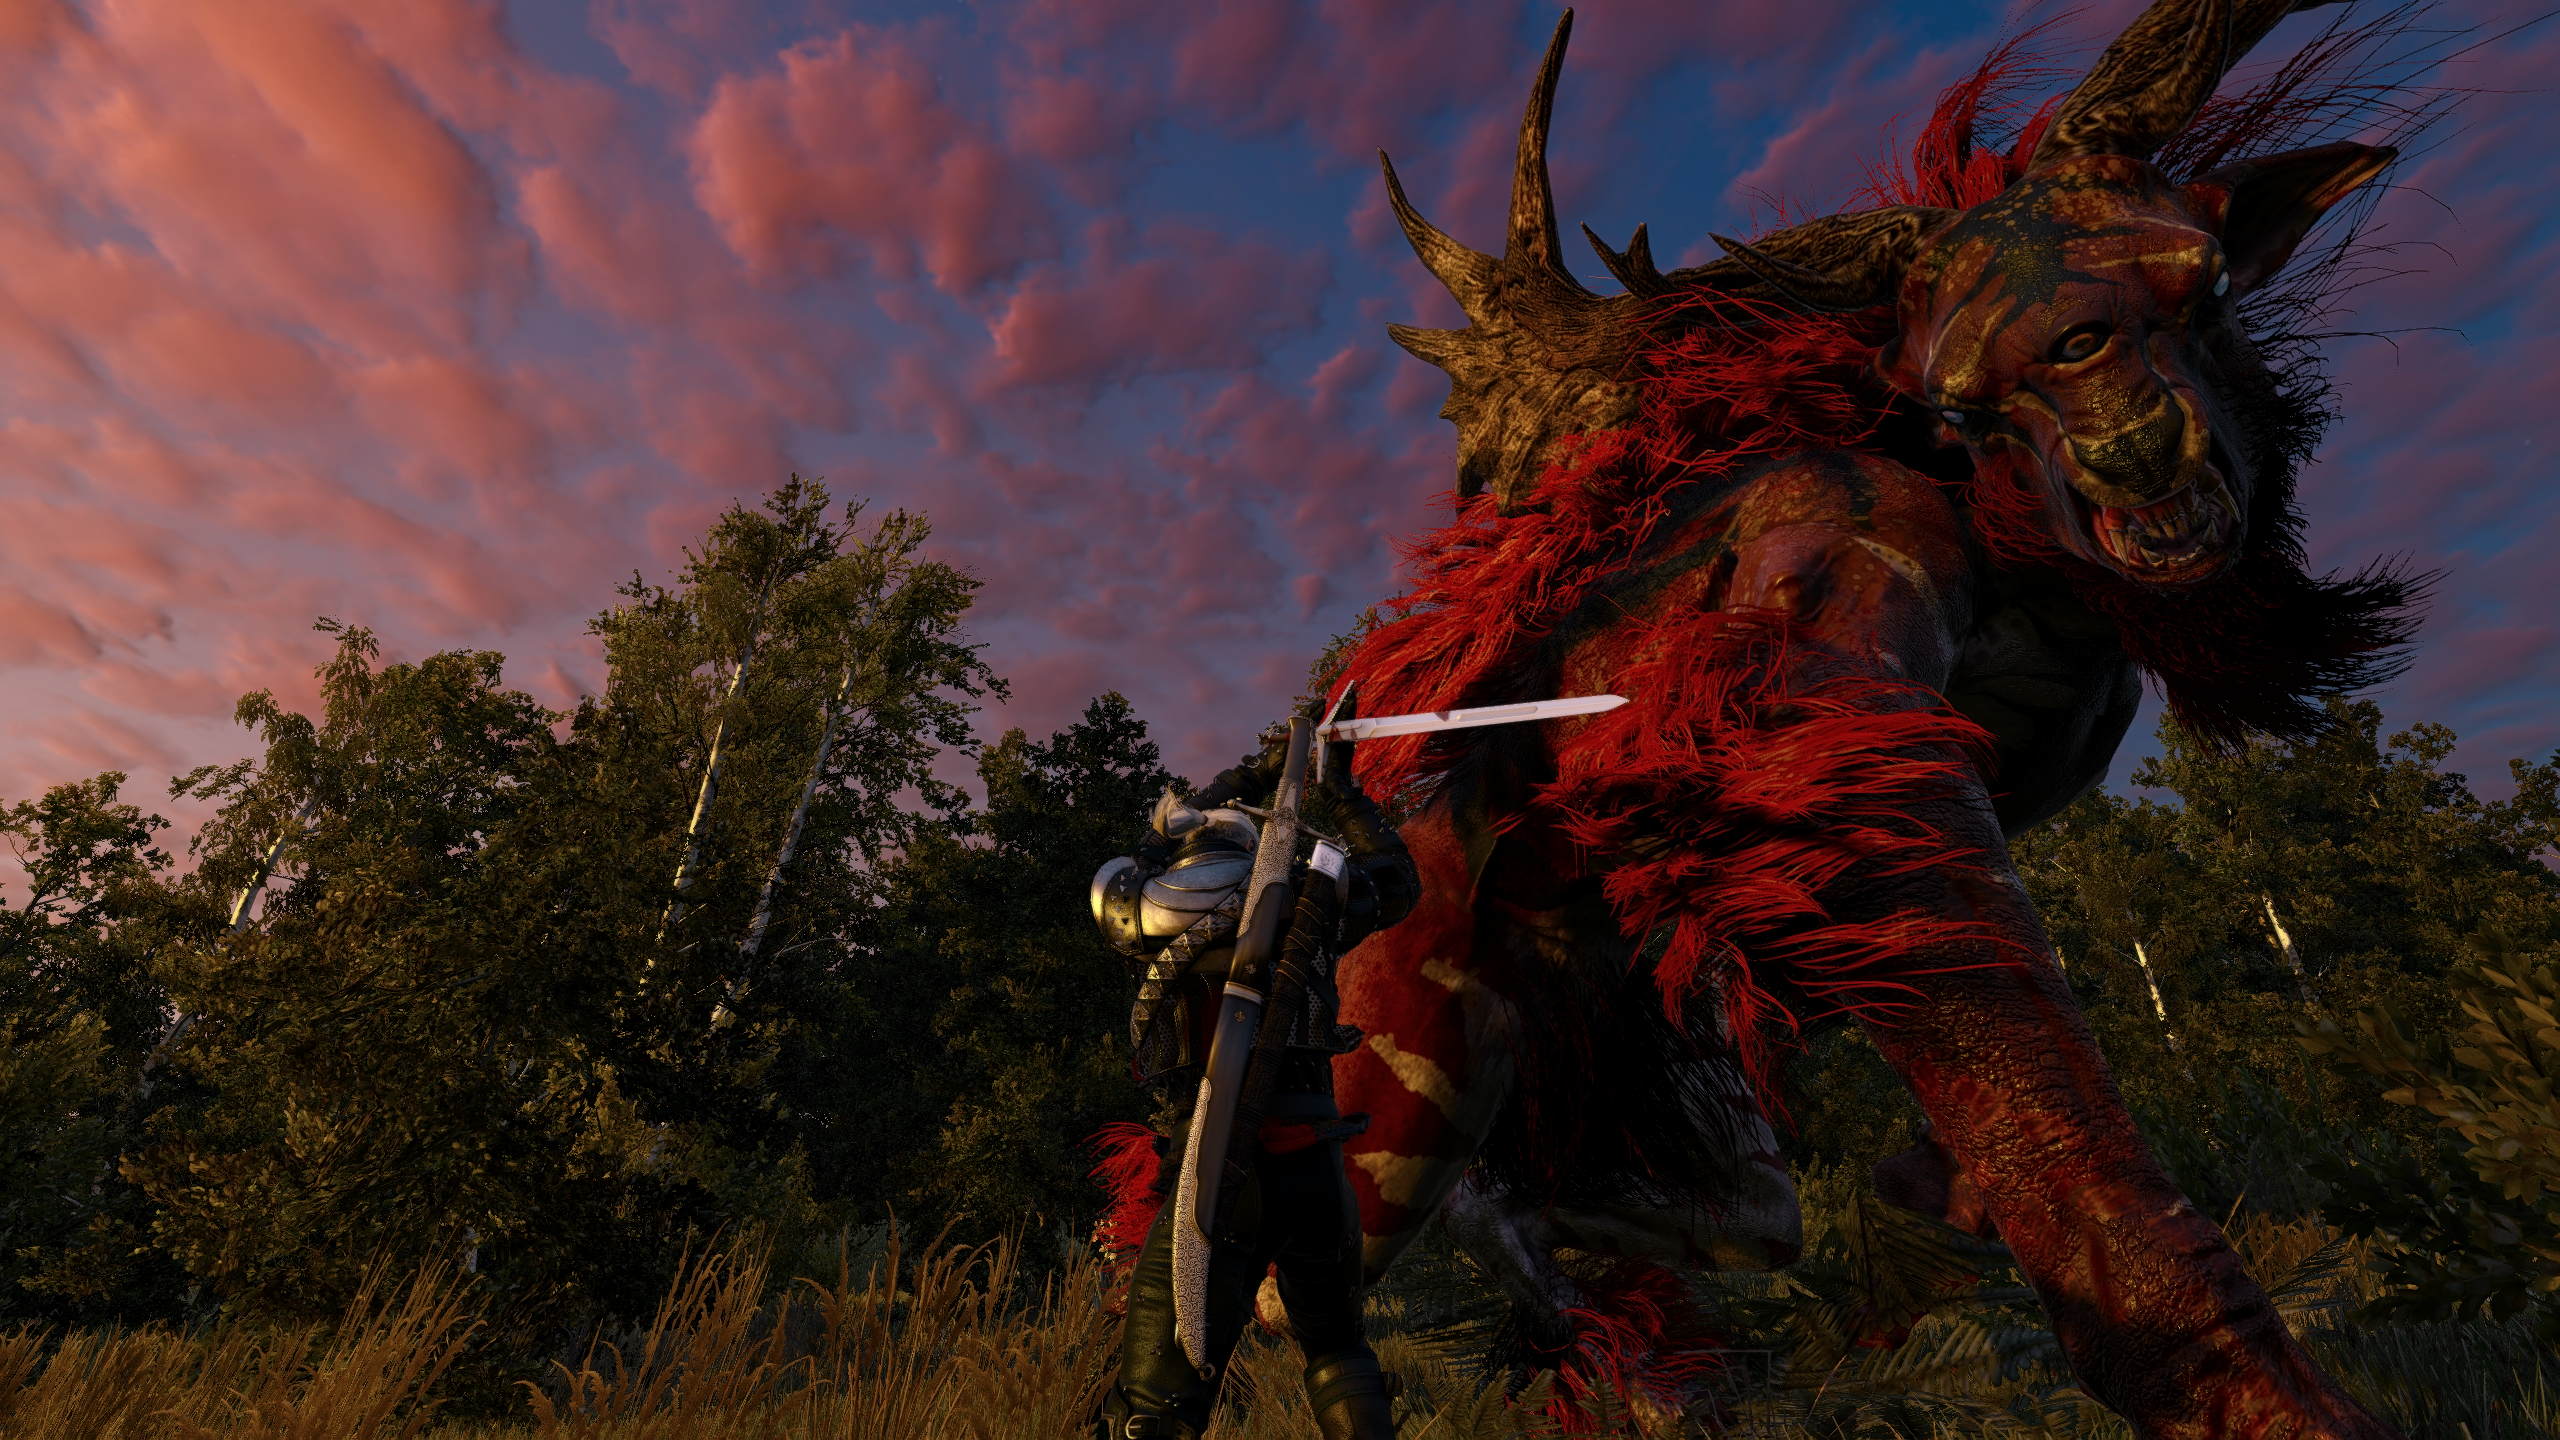 Samle anden handle The Witcher 3 Red Fiend fight. by ev666il on DeviantArt